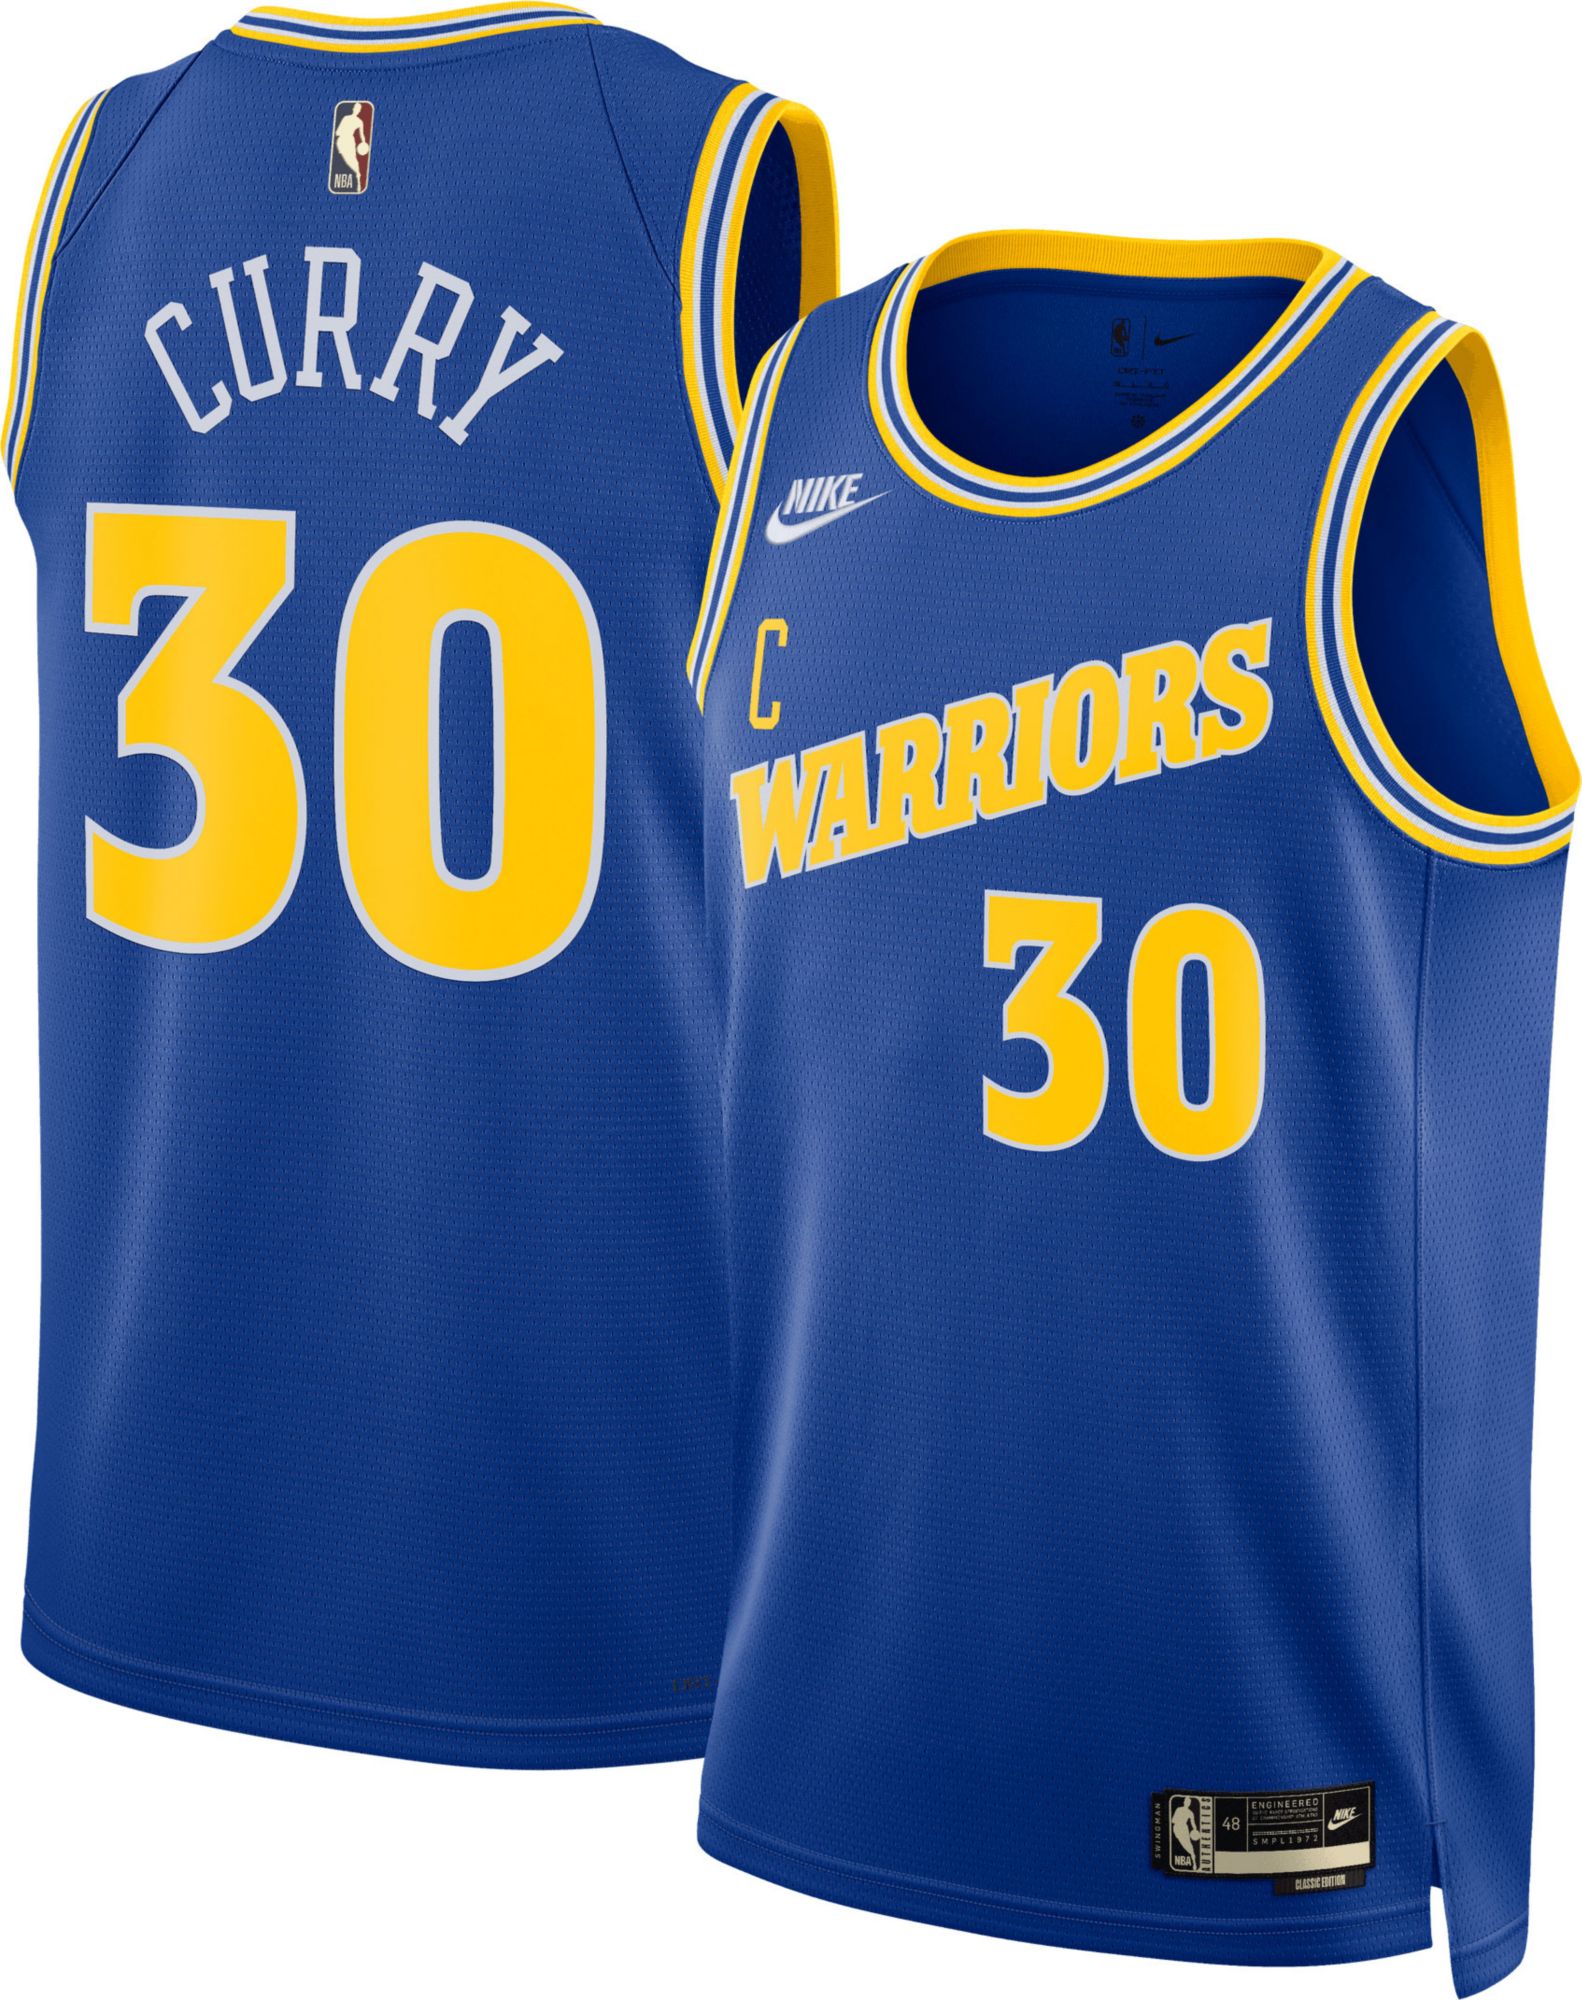 youth youth youth yellow stephen curry year 0 jersey